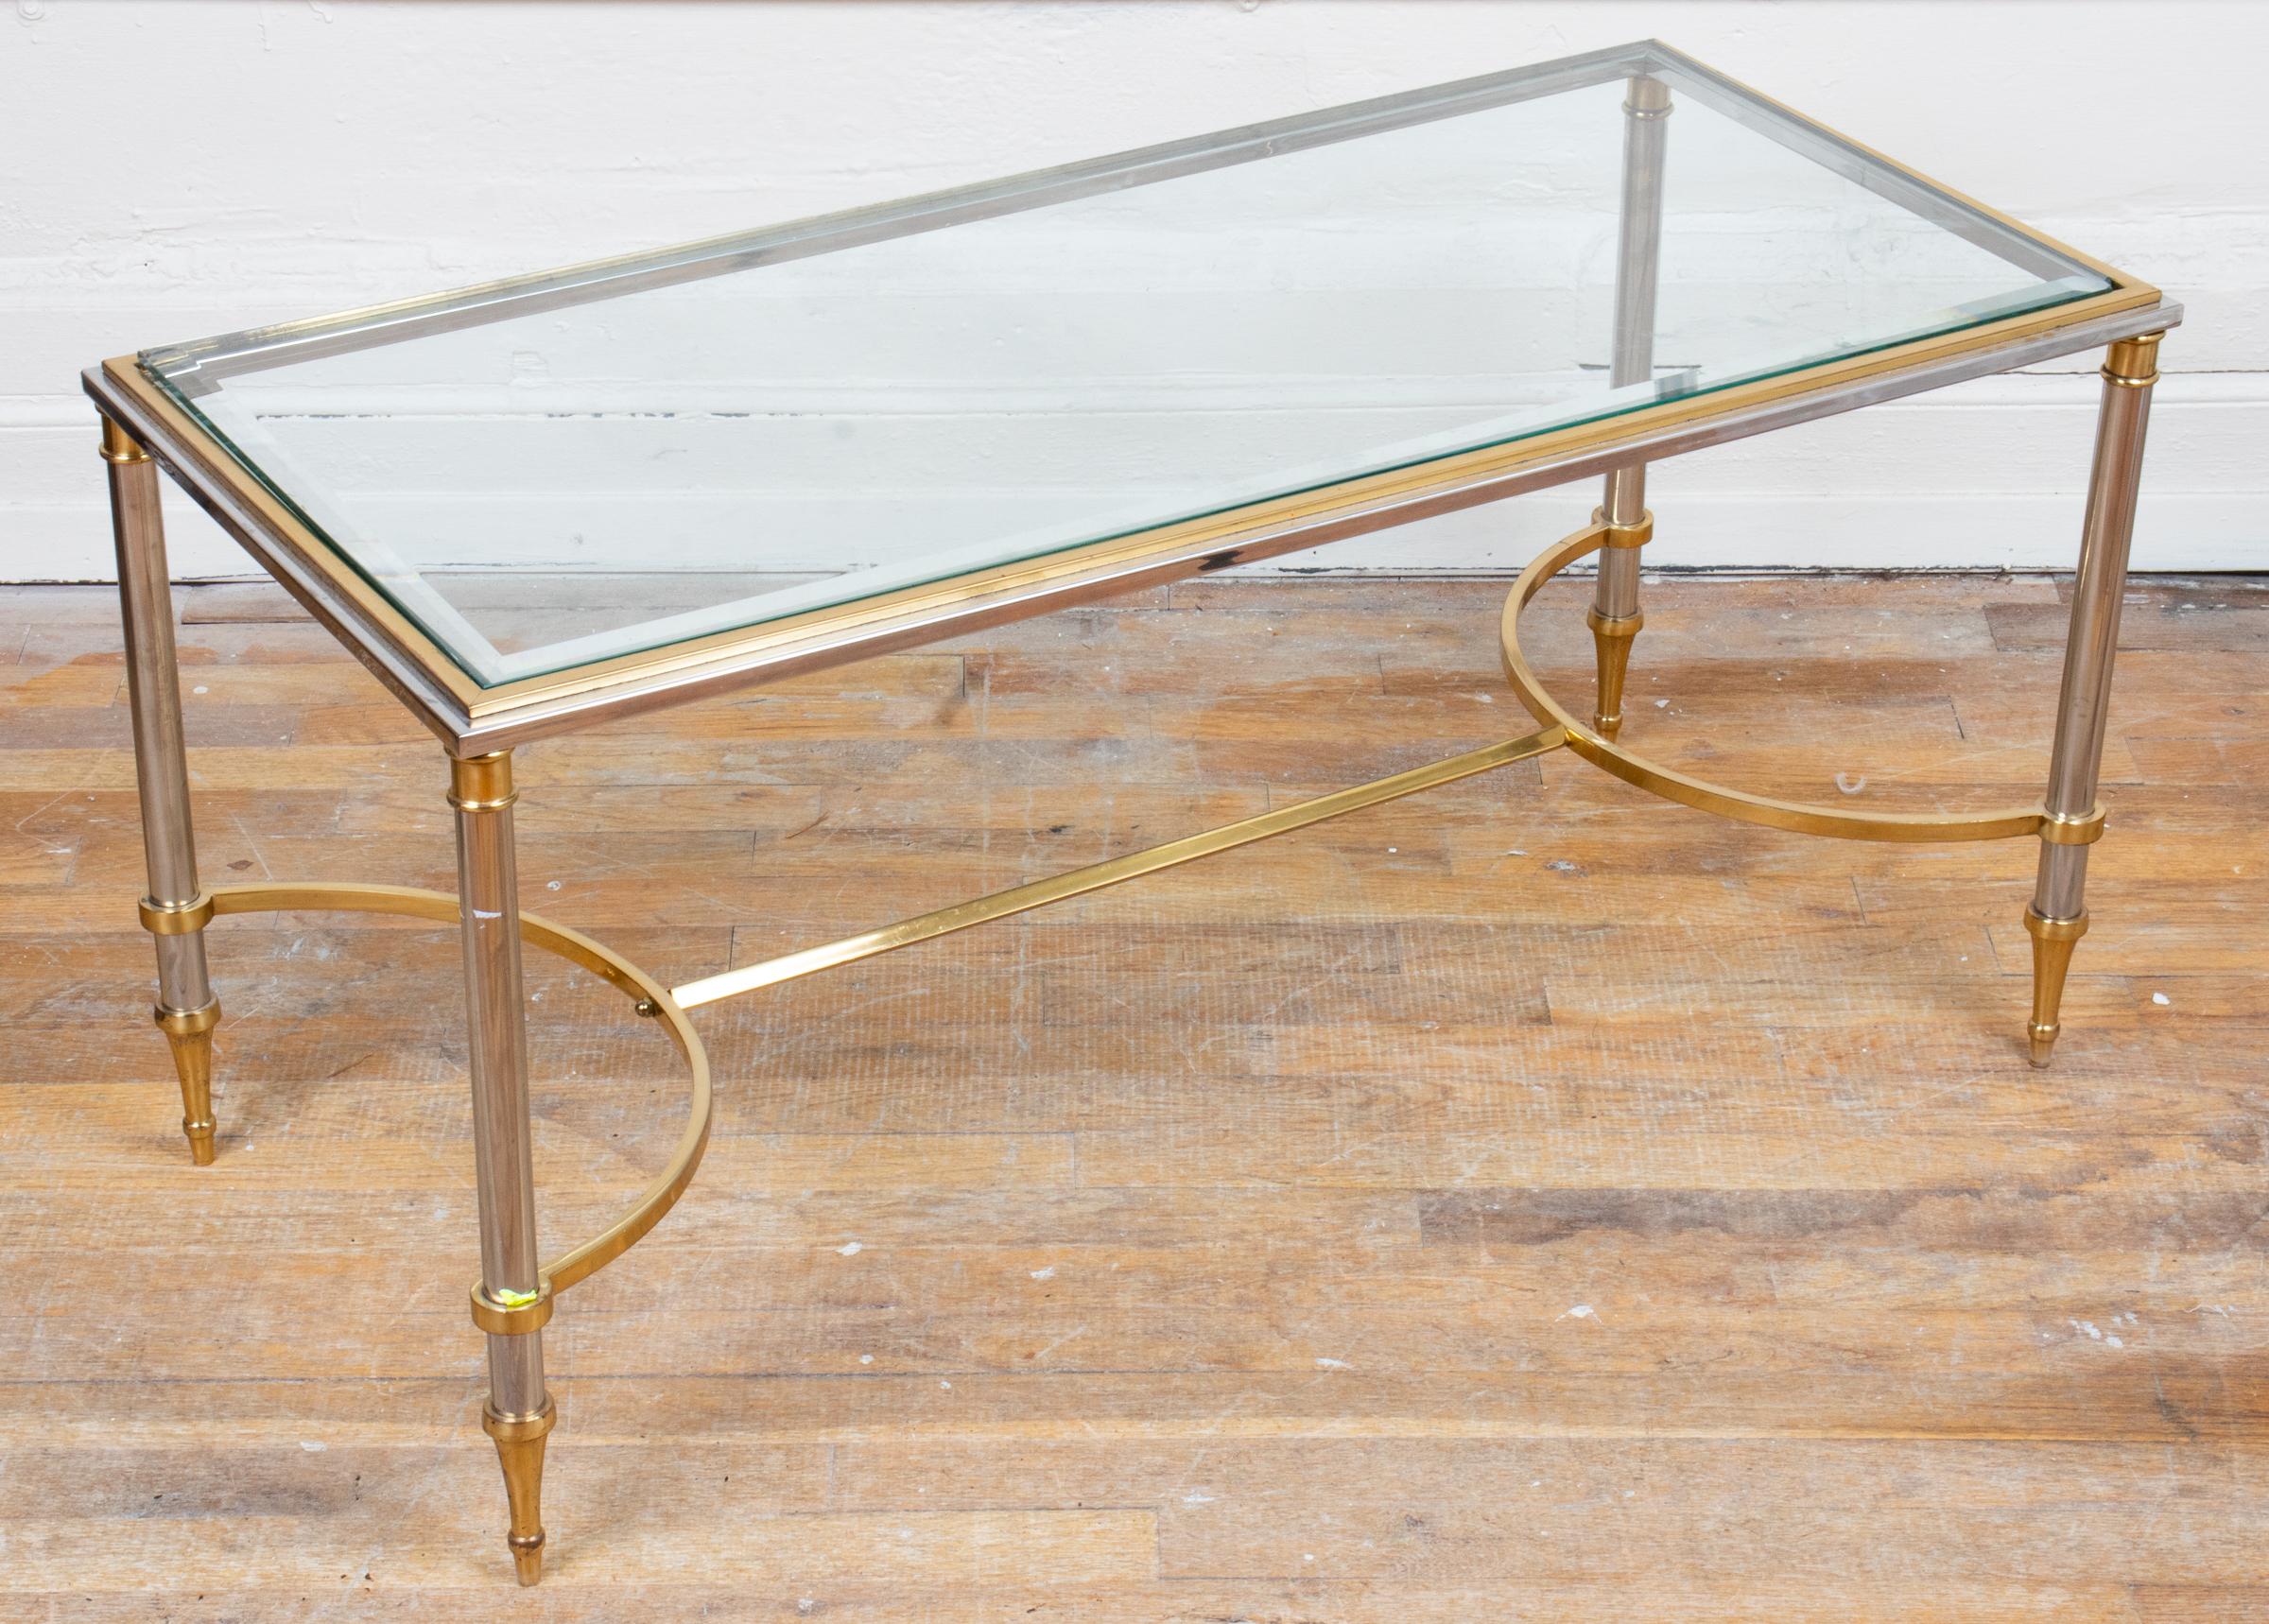 Maison Jansen style modern brass and chrome coffee table, with curved stretcher and glass top. Measures: 18.5” H x 38.5” W x 18.25” D.